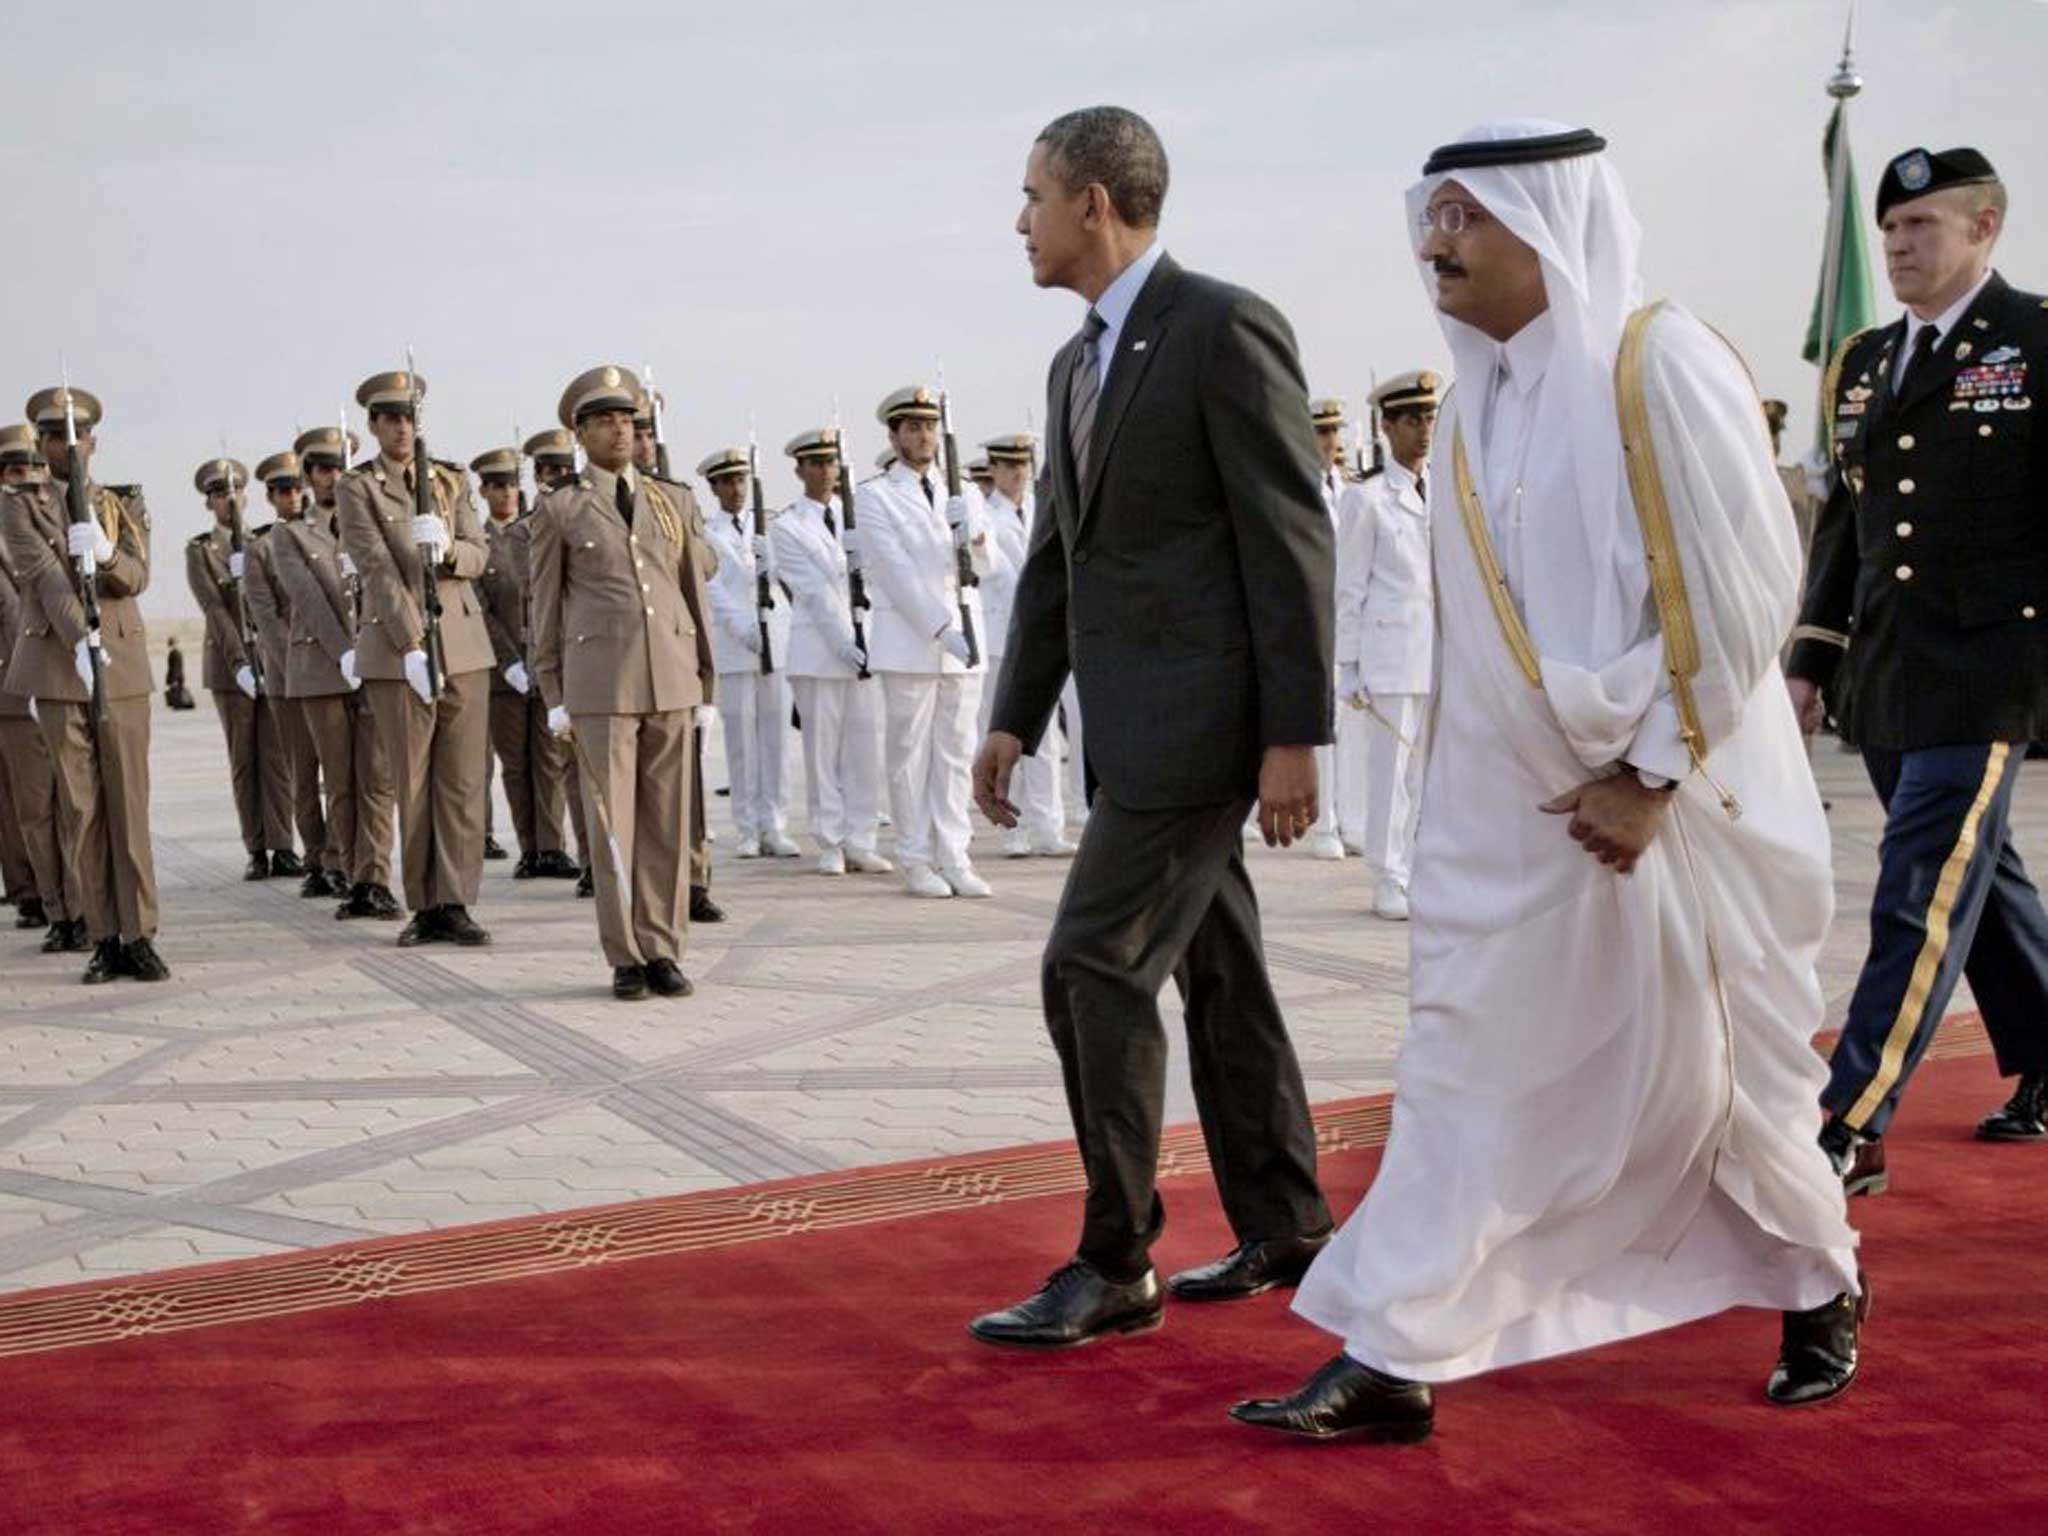 Special guest: Barack Obama is welcomed in Riyadh on Friday